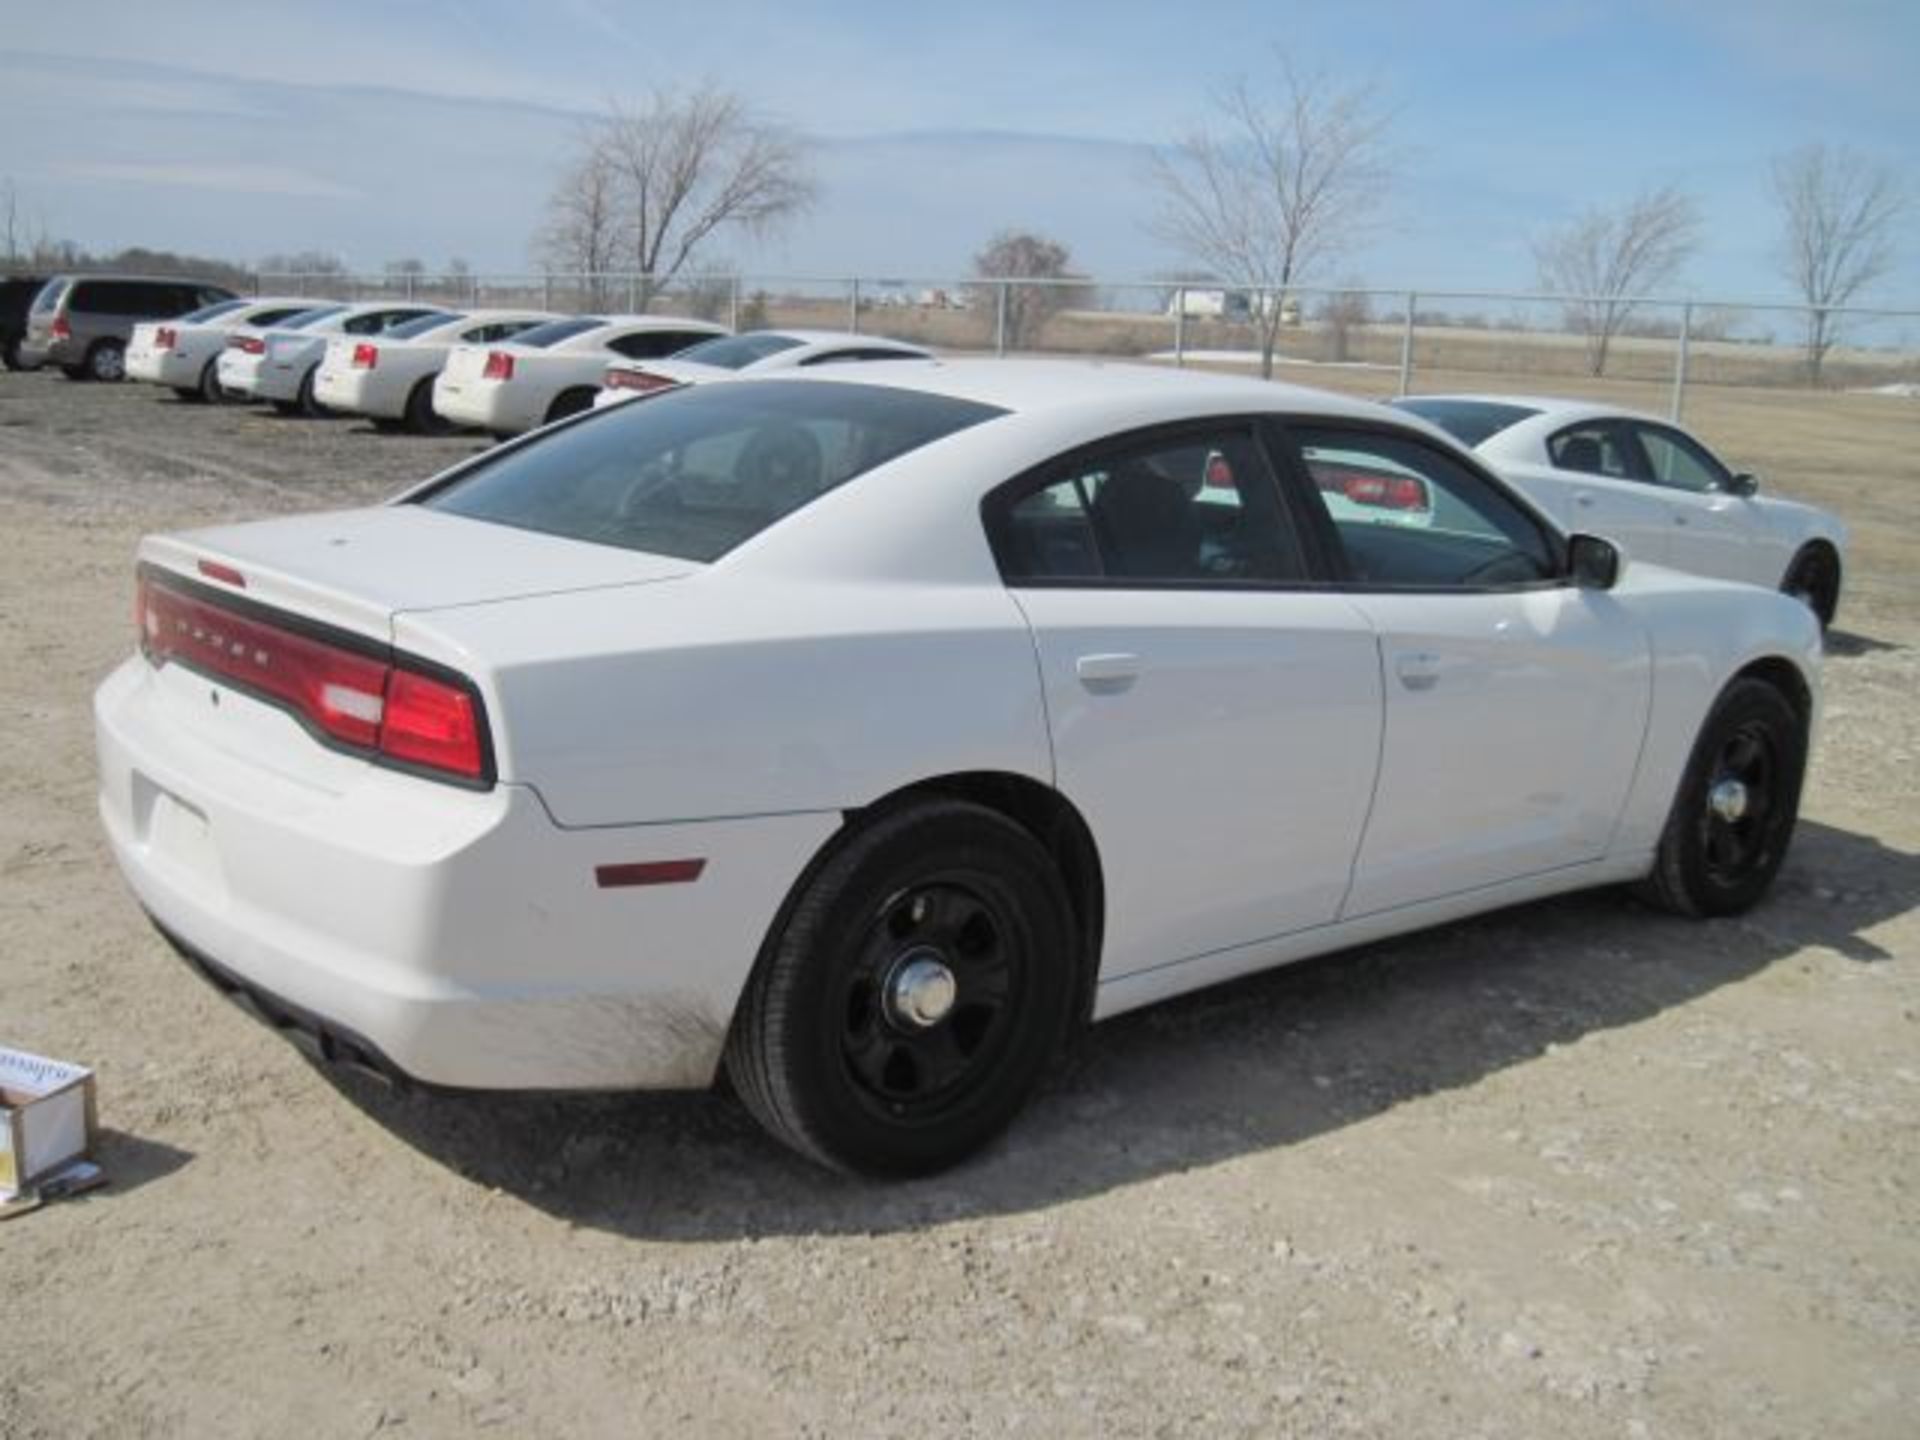 Lot 35 -  Lot# 35 2011 Dodge Charger 2011 Dodge Charger; 5.7L V8; tires fair; no scratches or dings; - Image 5 of 5